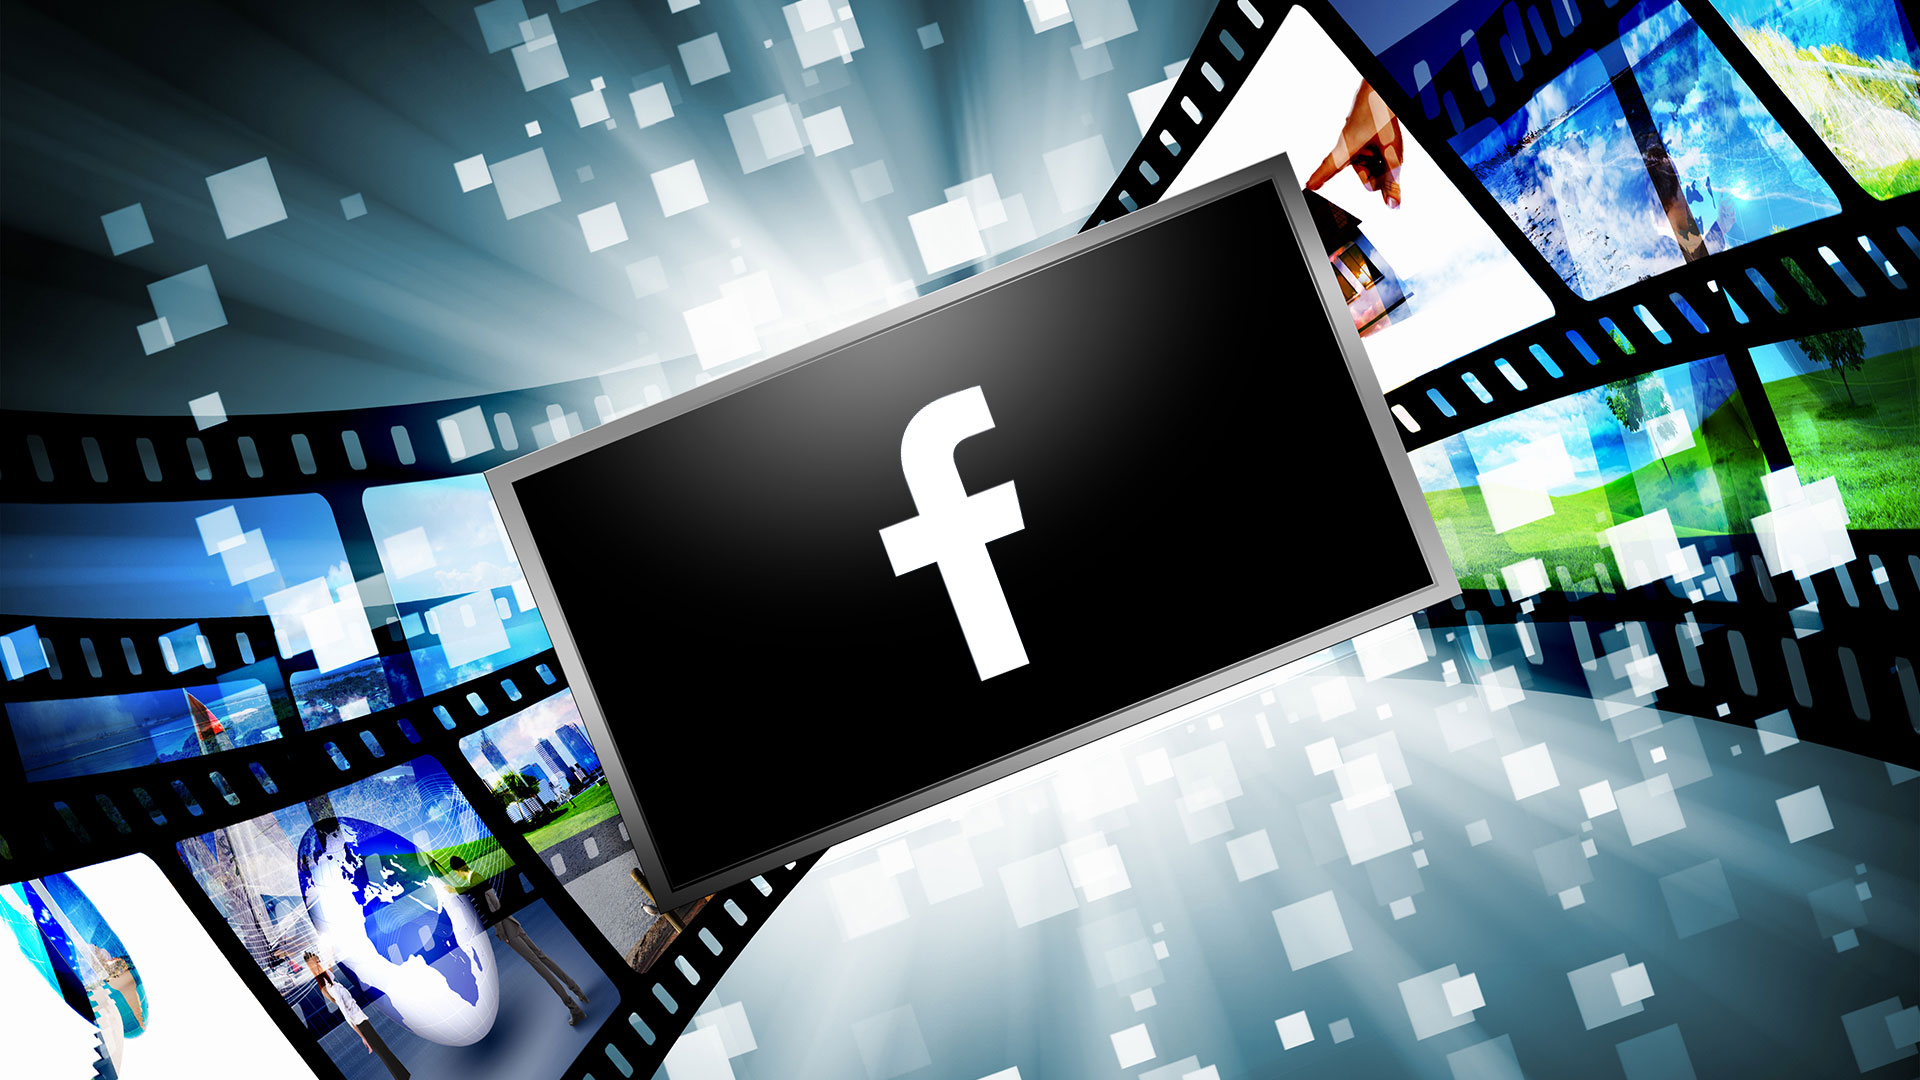 Facebook will try selling ads on TV screens next week